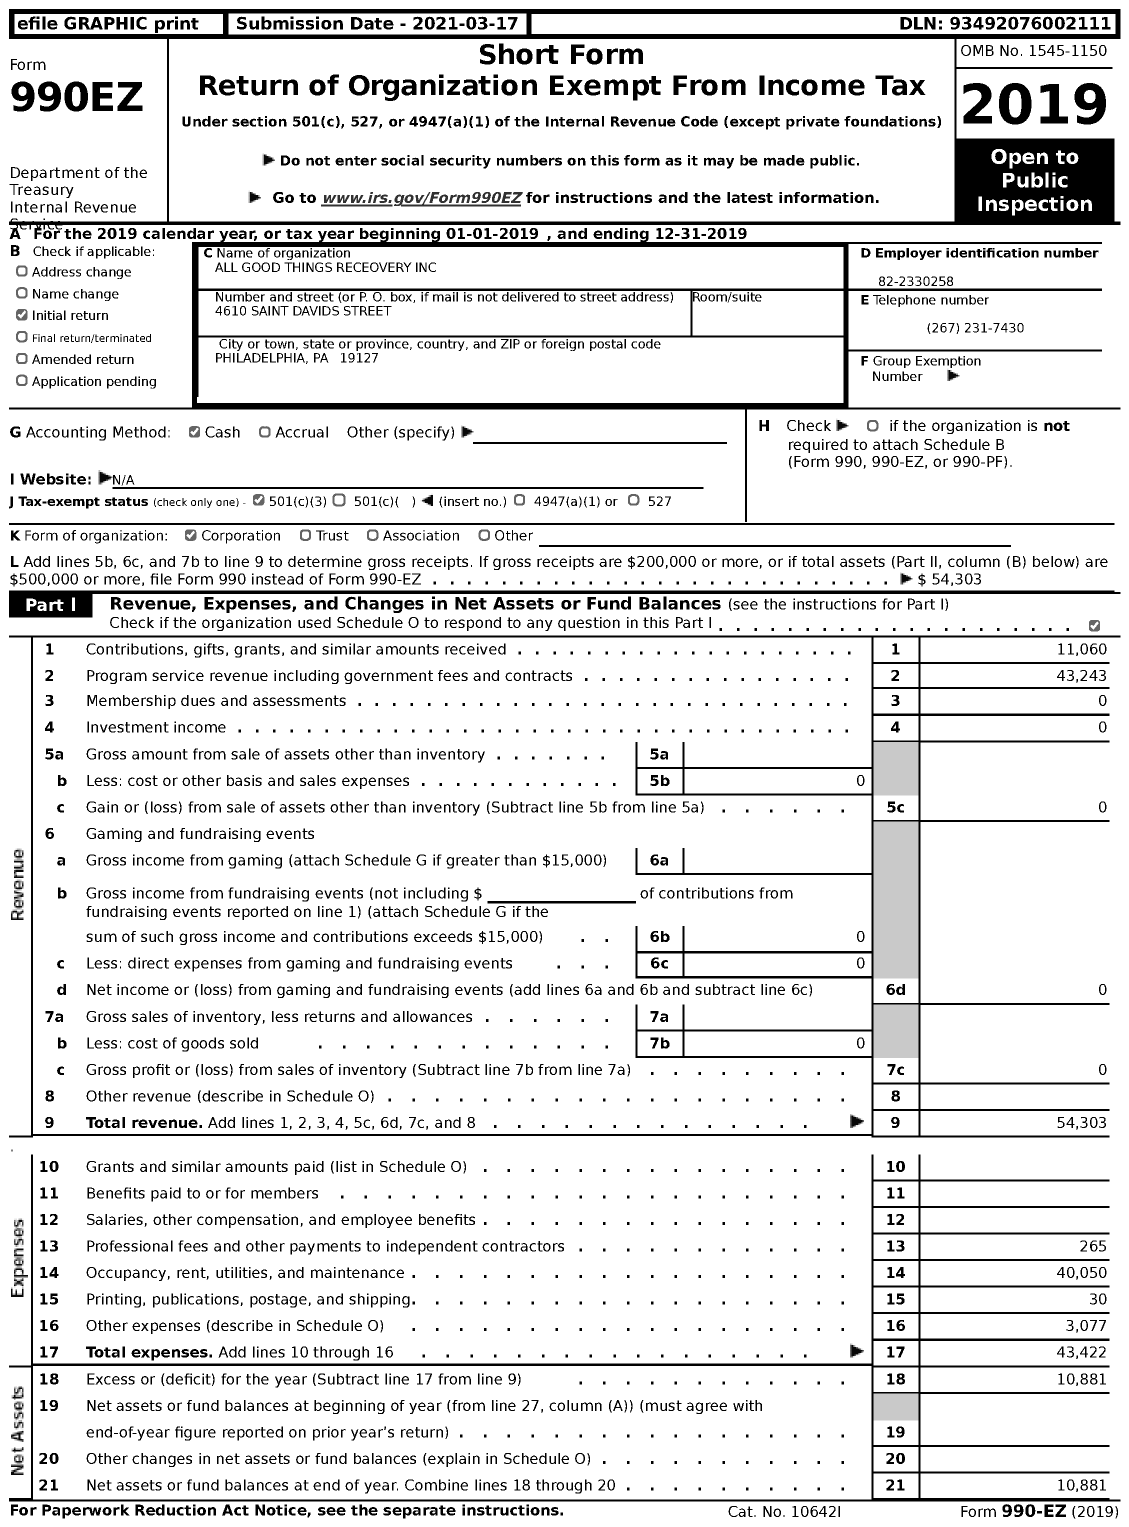 Image of first page of 2019 Form 990EZ for All Good Things Receovery